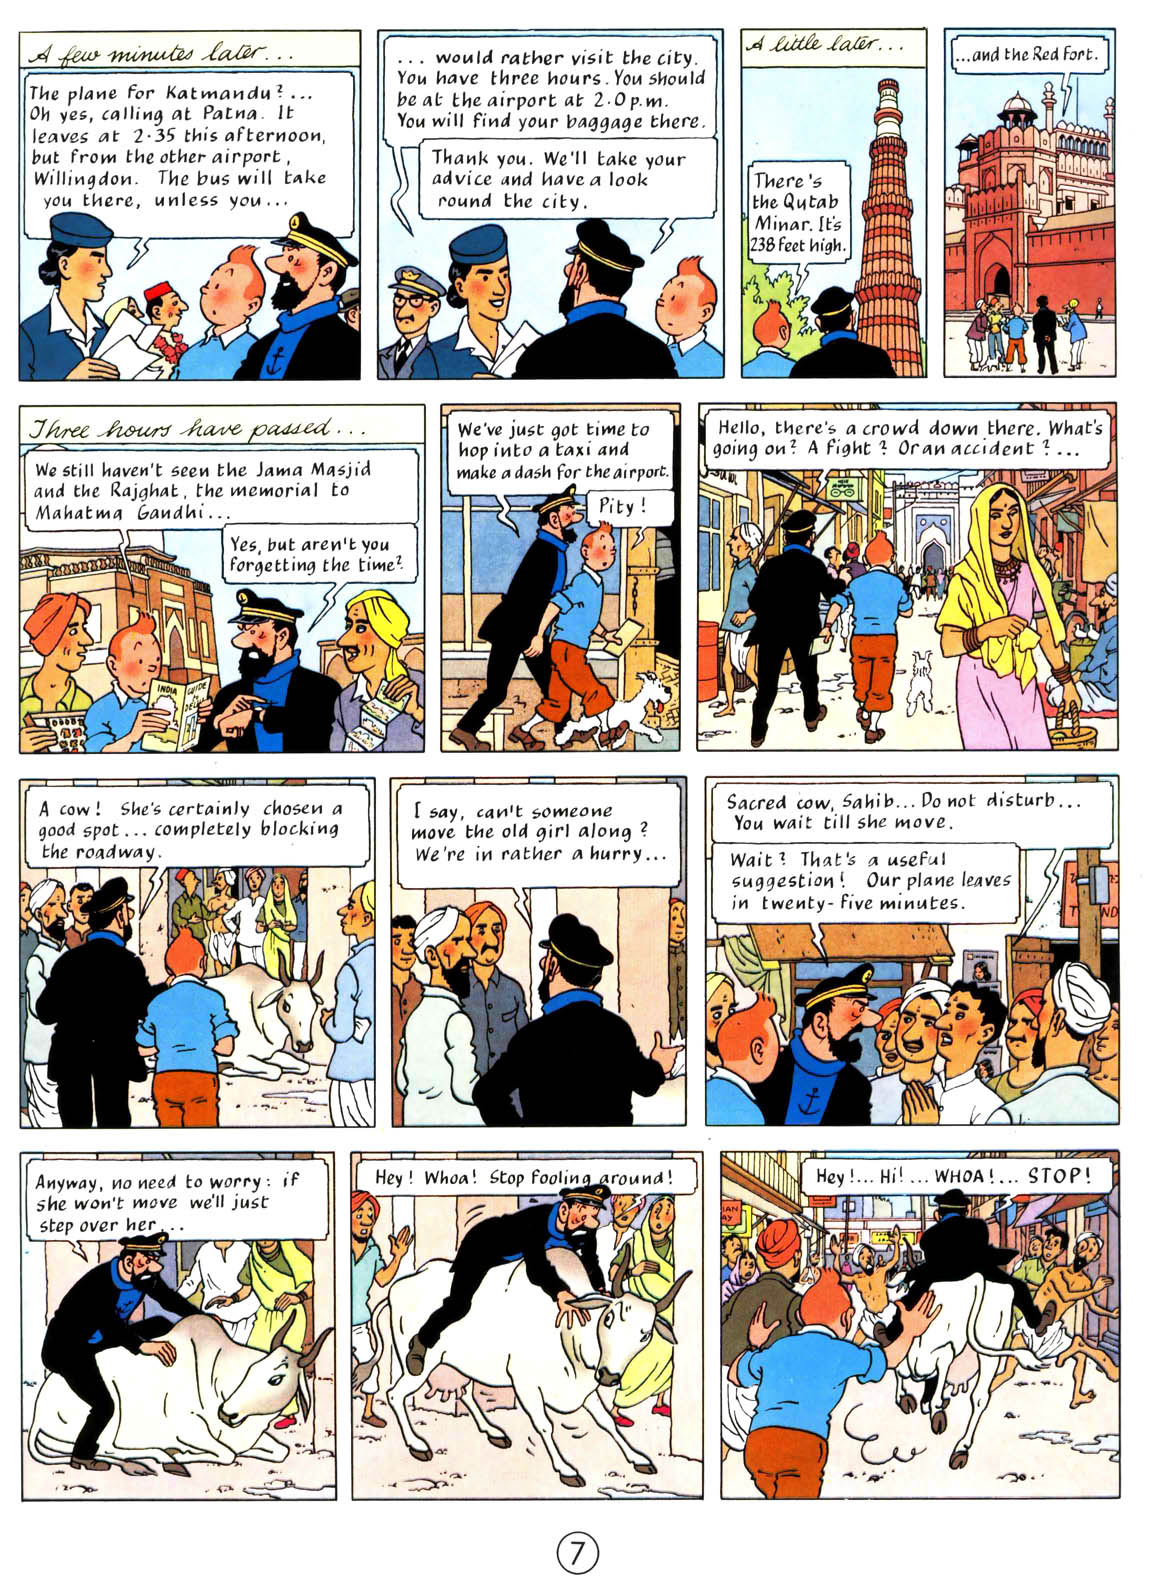 Read online The Adventures of Tintin comic -  Issue #20 - 11